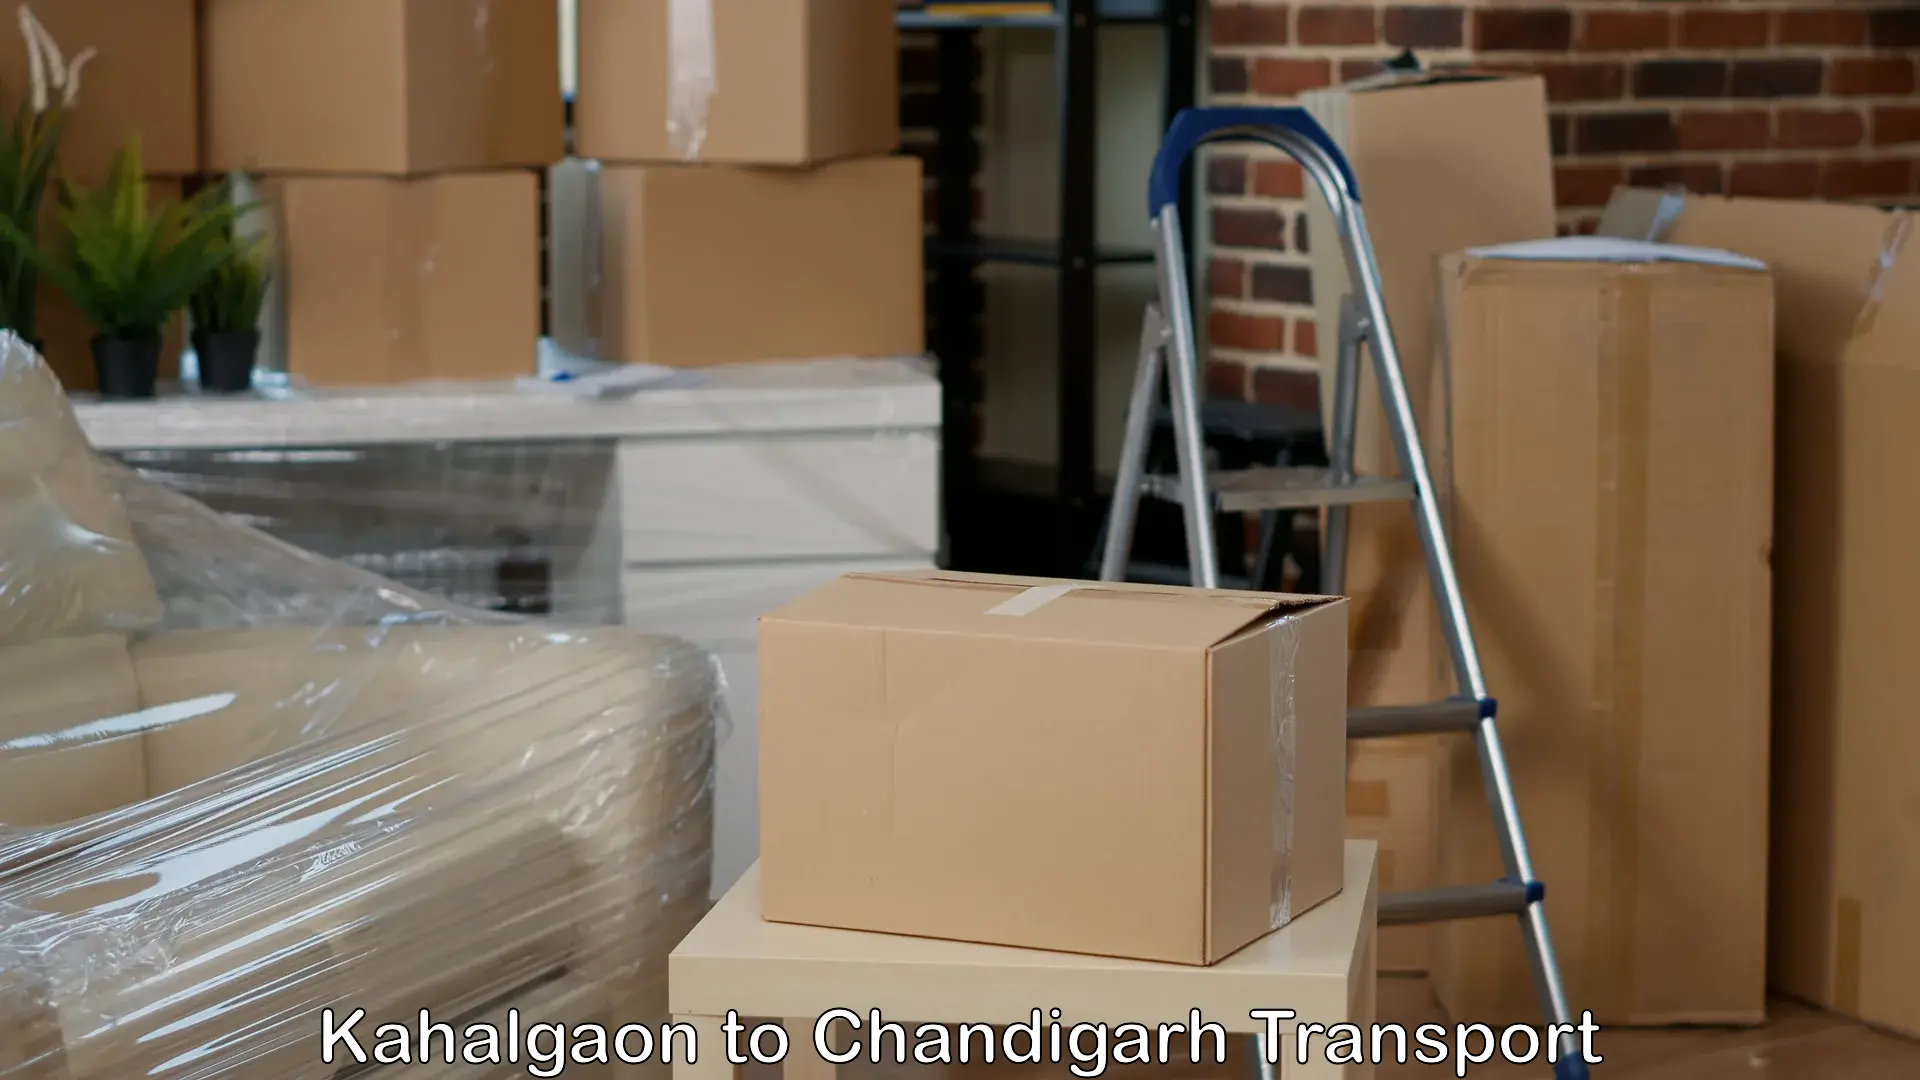 Container transport service Kahalgaon to Chandigarh